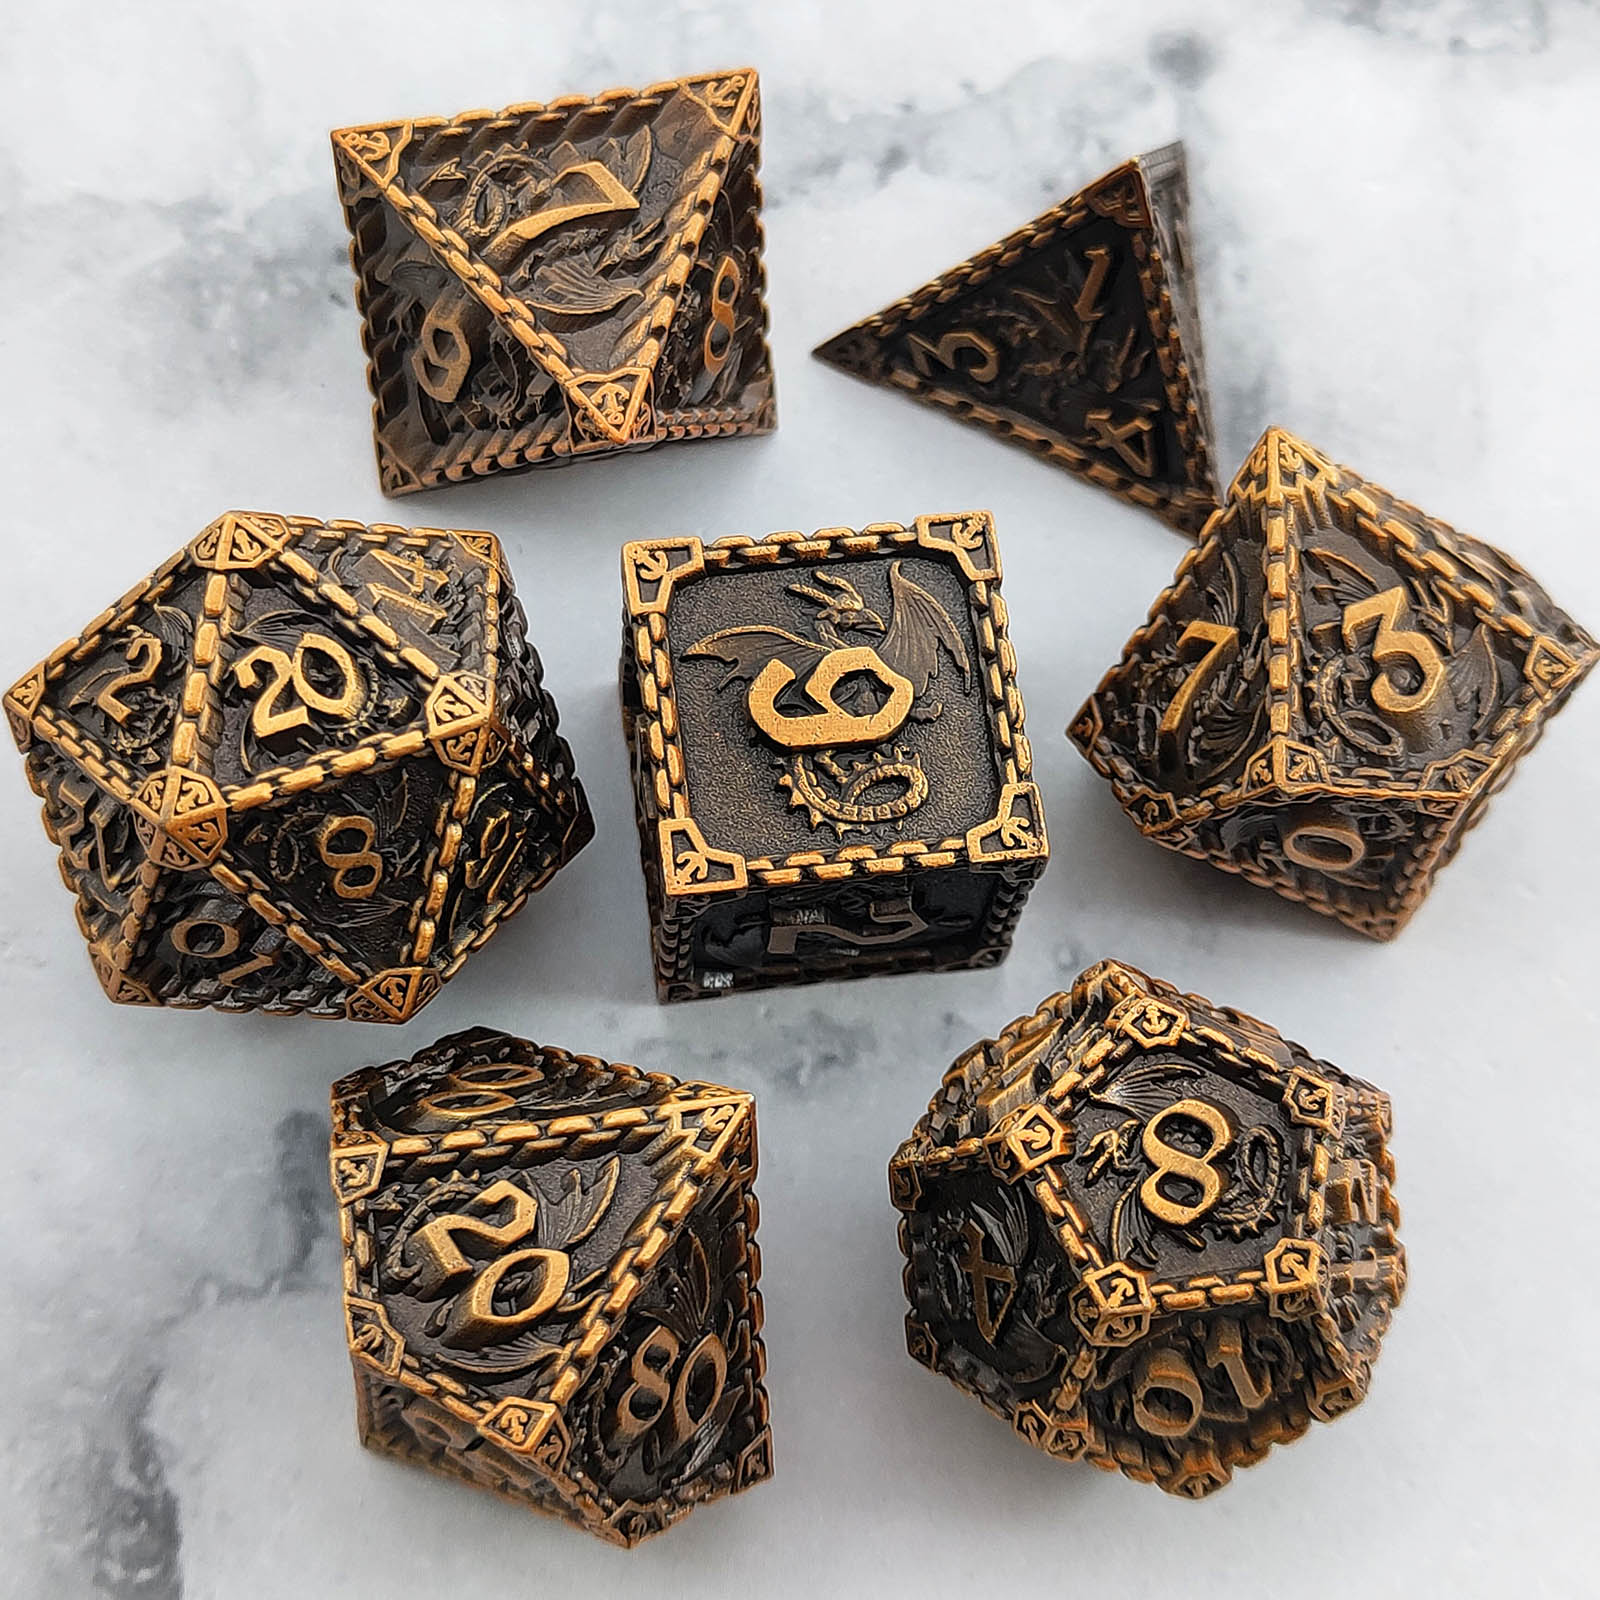 Metal Coc Running Group Dice Polyhedron TRPG